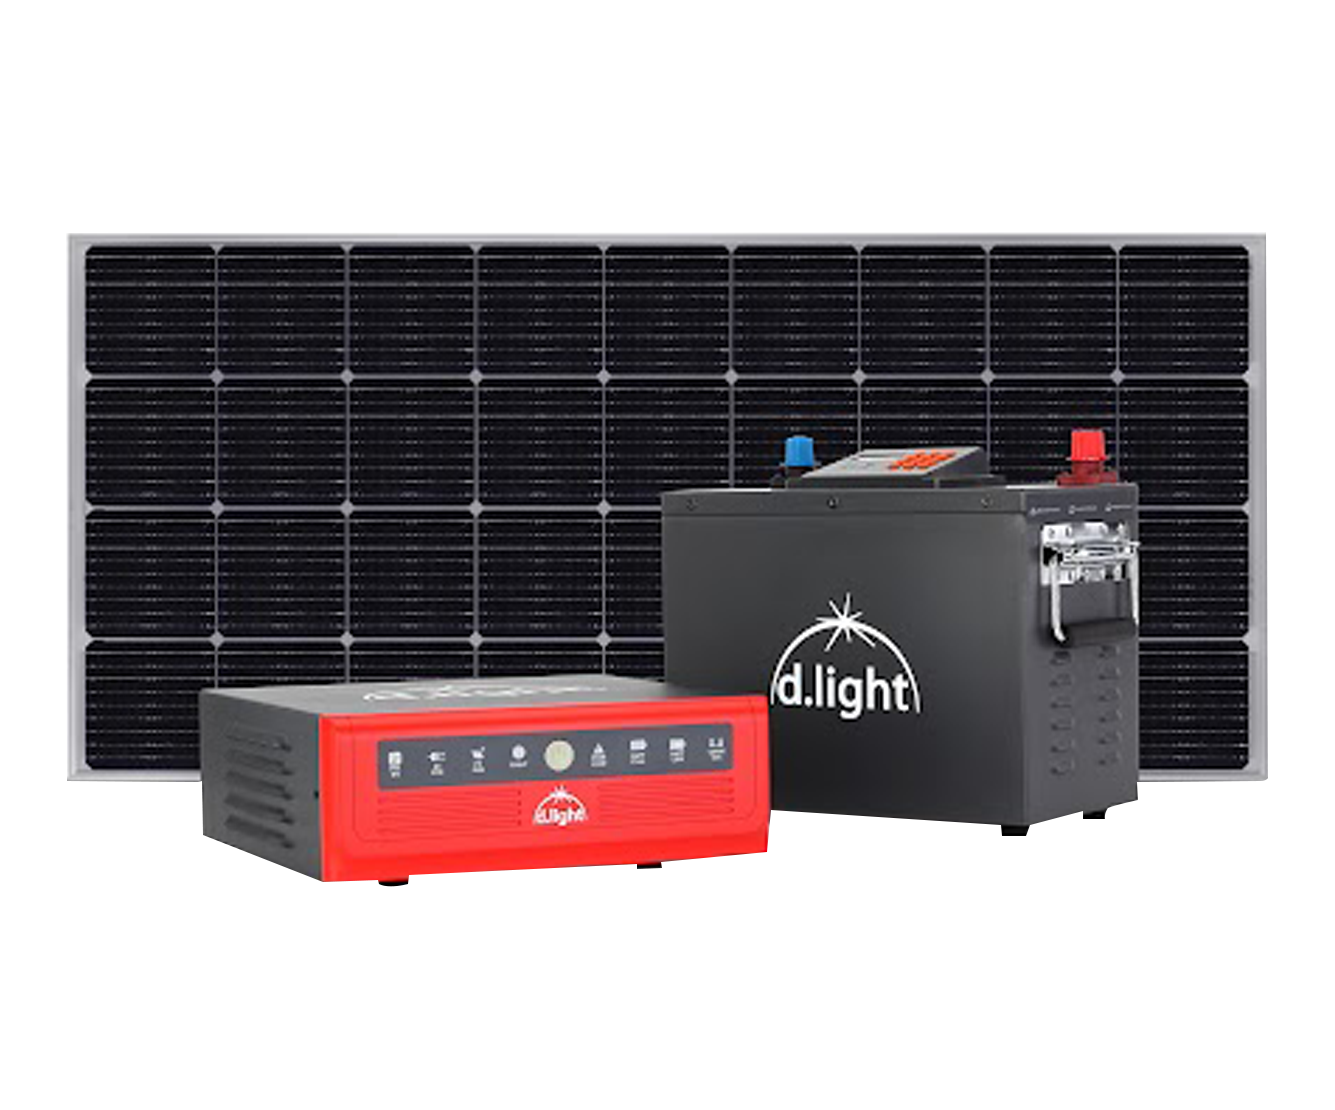 d.light Secures $176 Million Facility to Expand Solar Access in East Africa